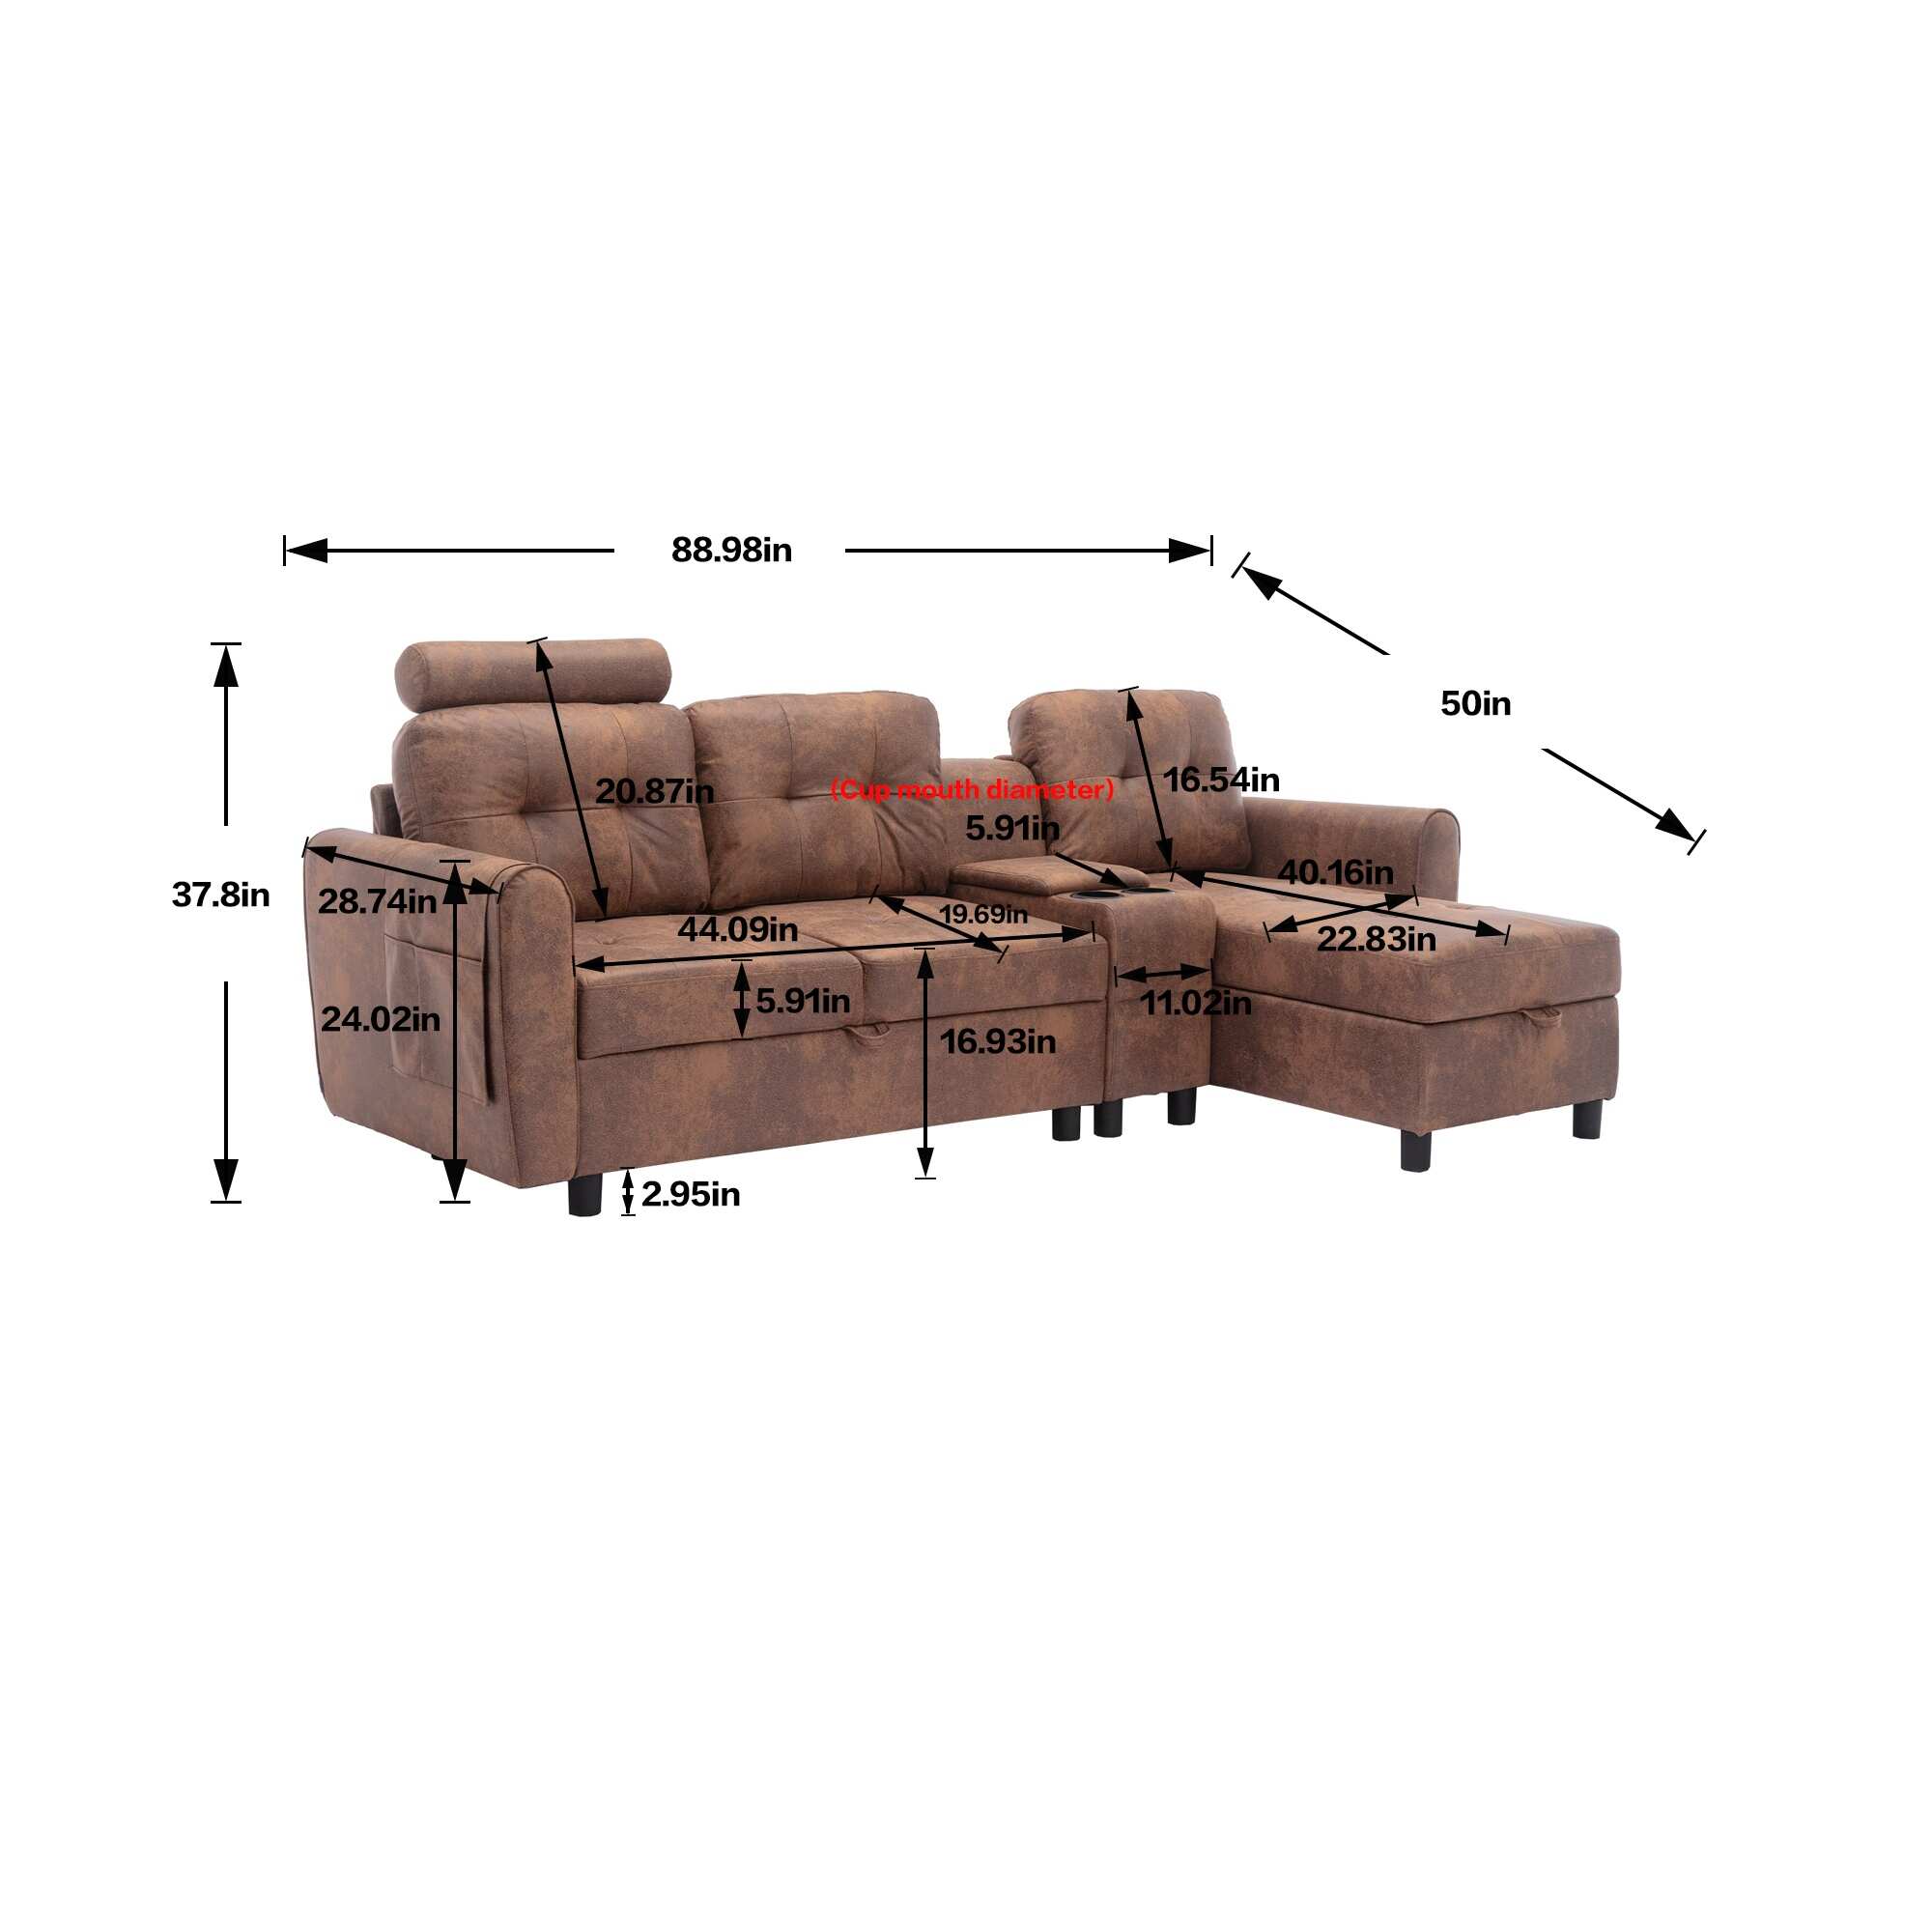 HOMEFUN Velvet/PU/Fabric Upholstered Tufted L-Shape Sectional Storage Convertible Sofa